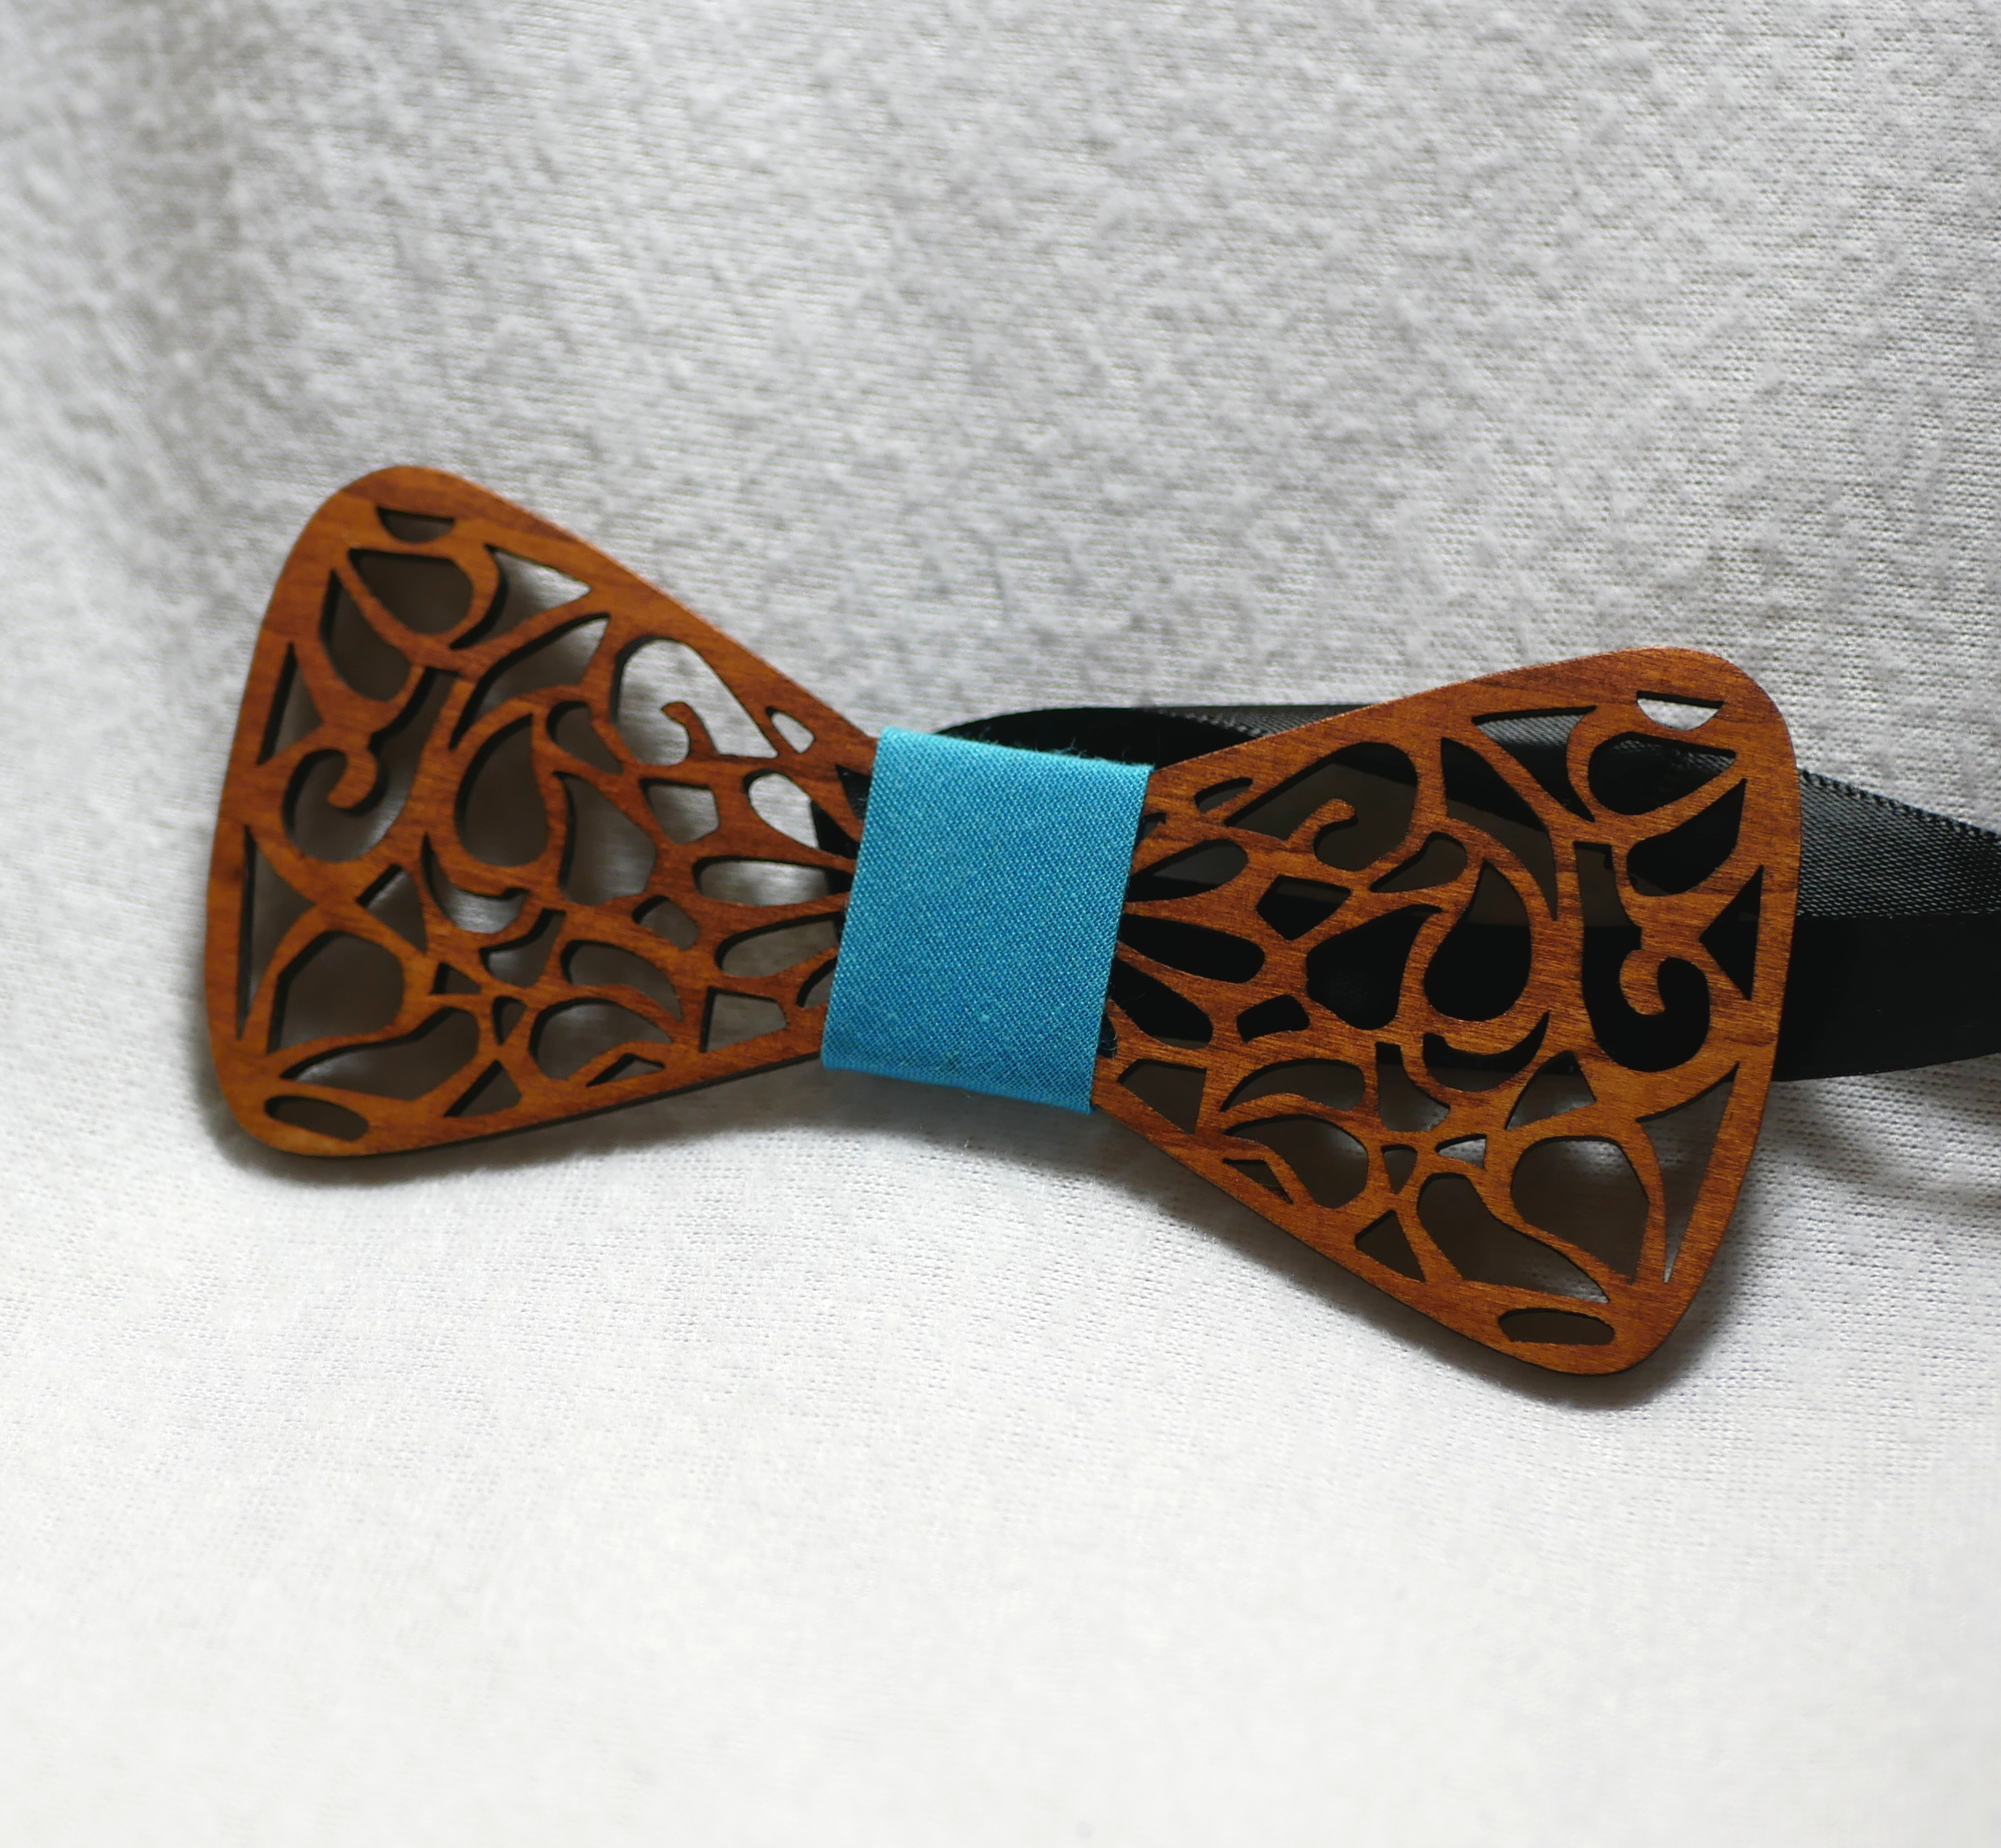 Wooden bow tie with turquoise ribbon